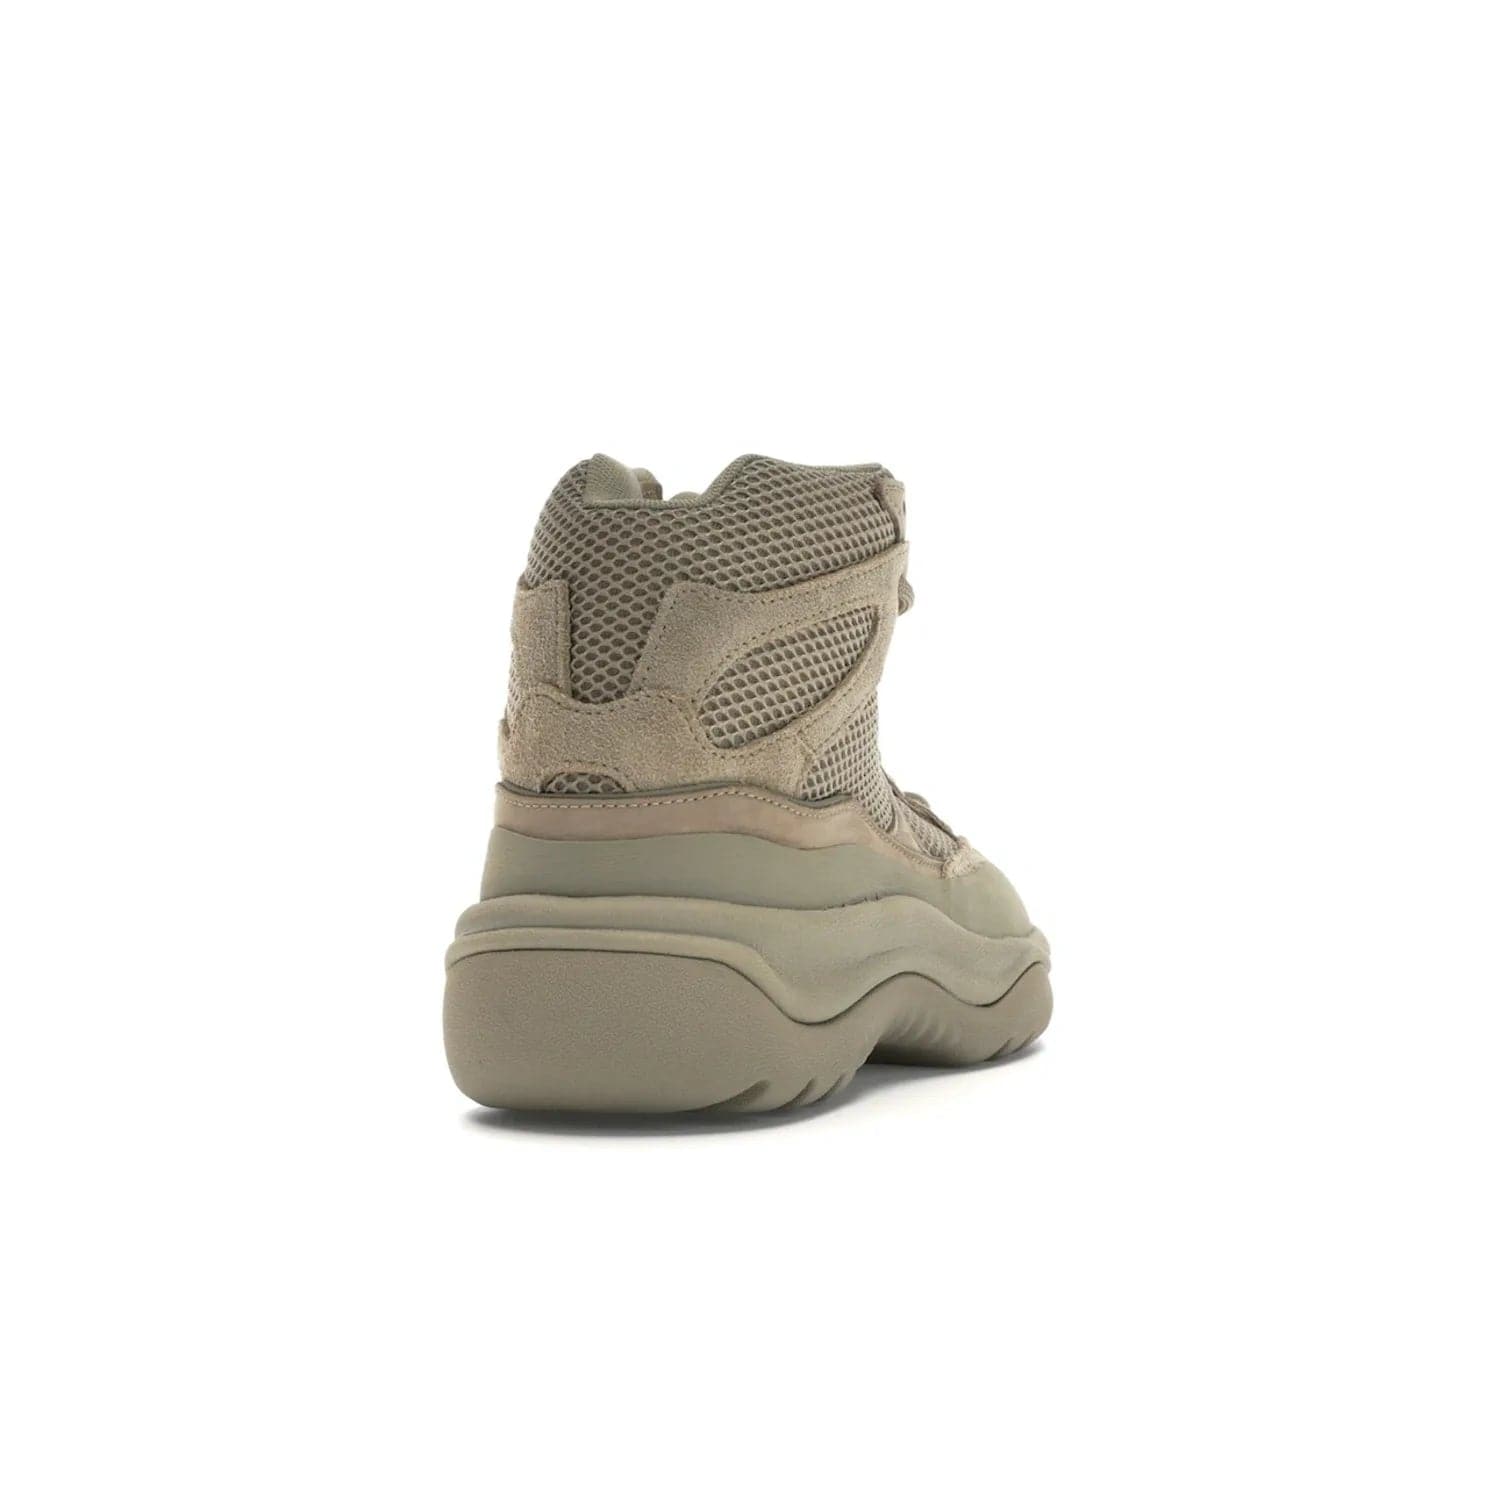 adidas Yeezy Desert Boot Rock - Image 30 - Only at www.BallersClubKickz.com - #
This season, make a fashion statement with the adidas Yeezy Desert Boot Rock. Nubuck and suede upper offers tonal style while the grooved sole provides traction and stability. Get yours in April 2019.